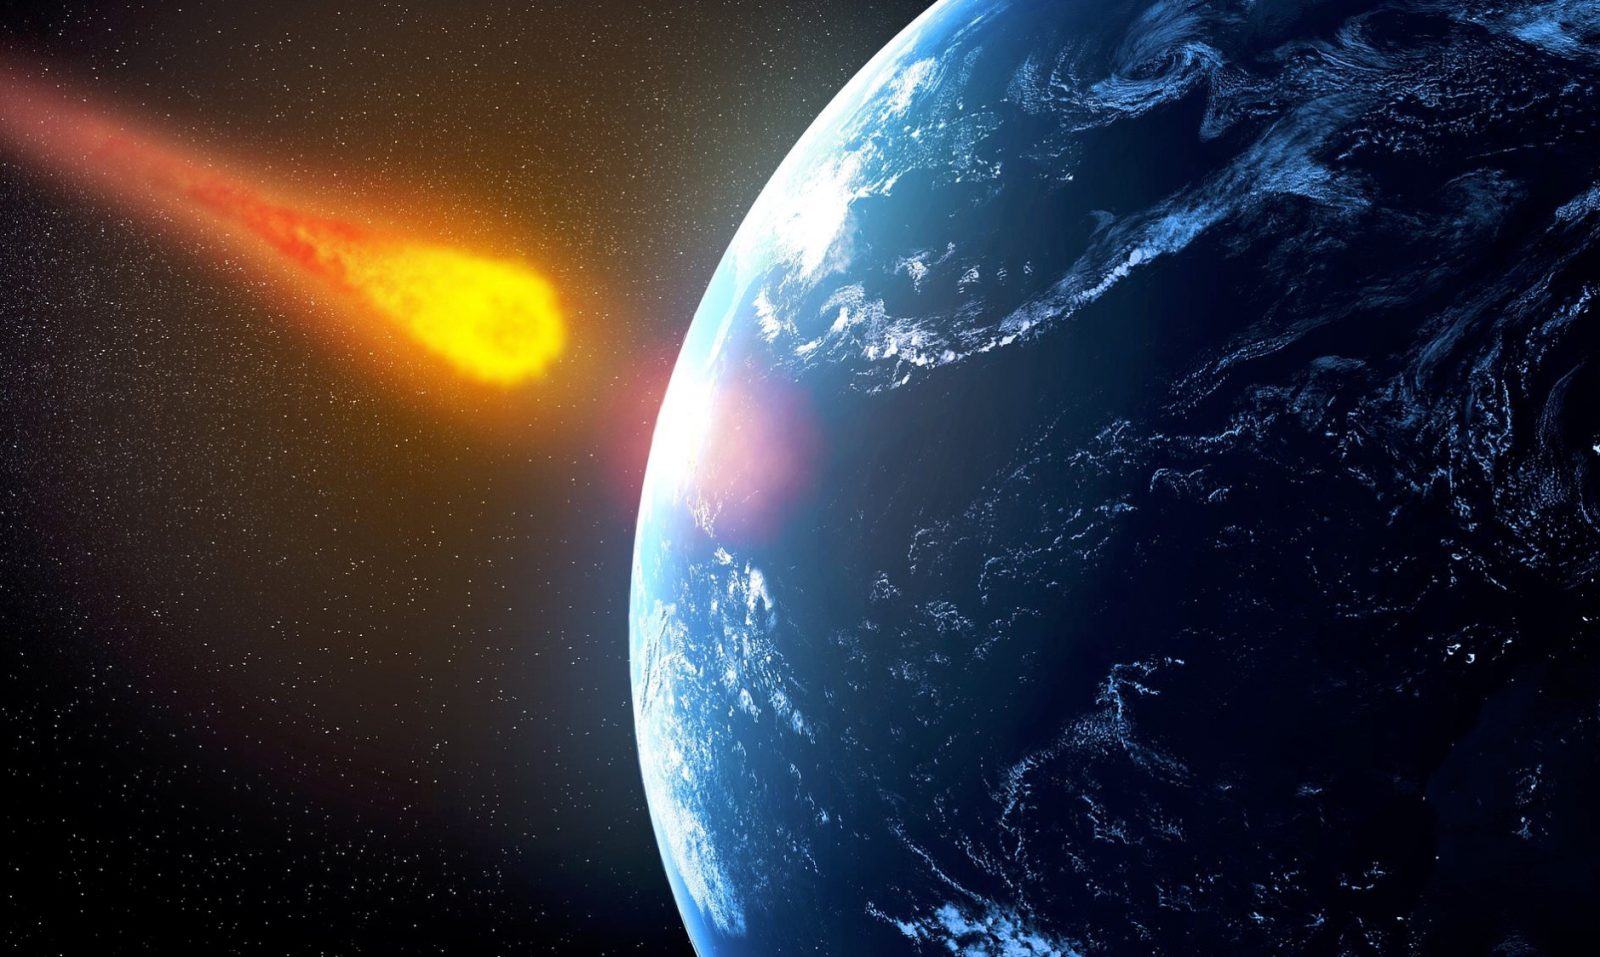 A 770-foot asteroid is rushing towards Earth